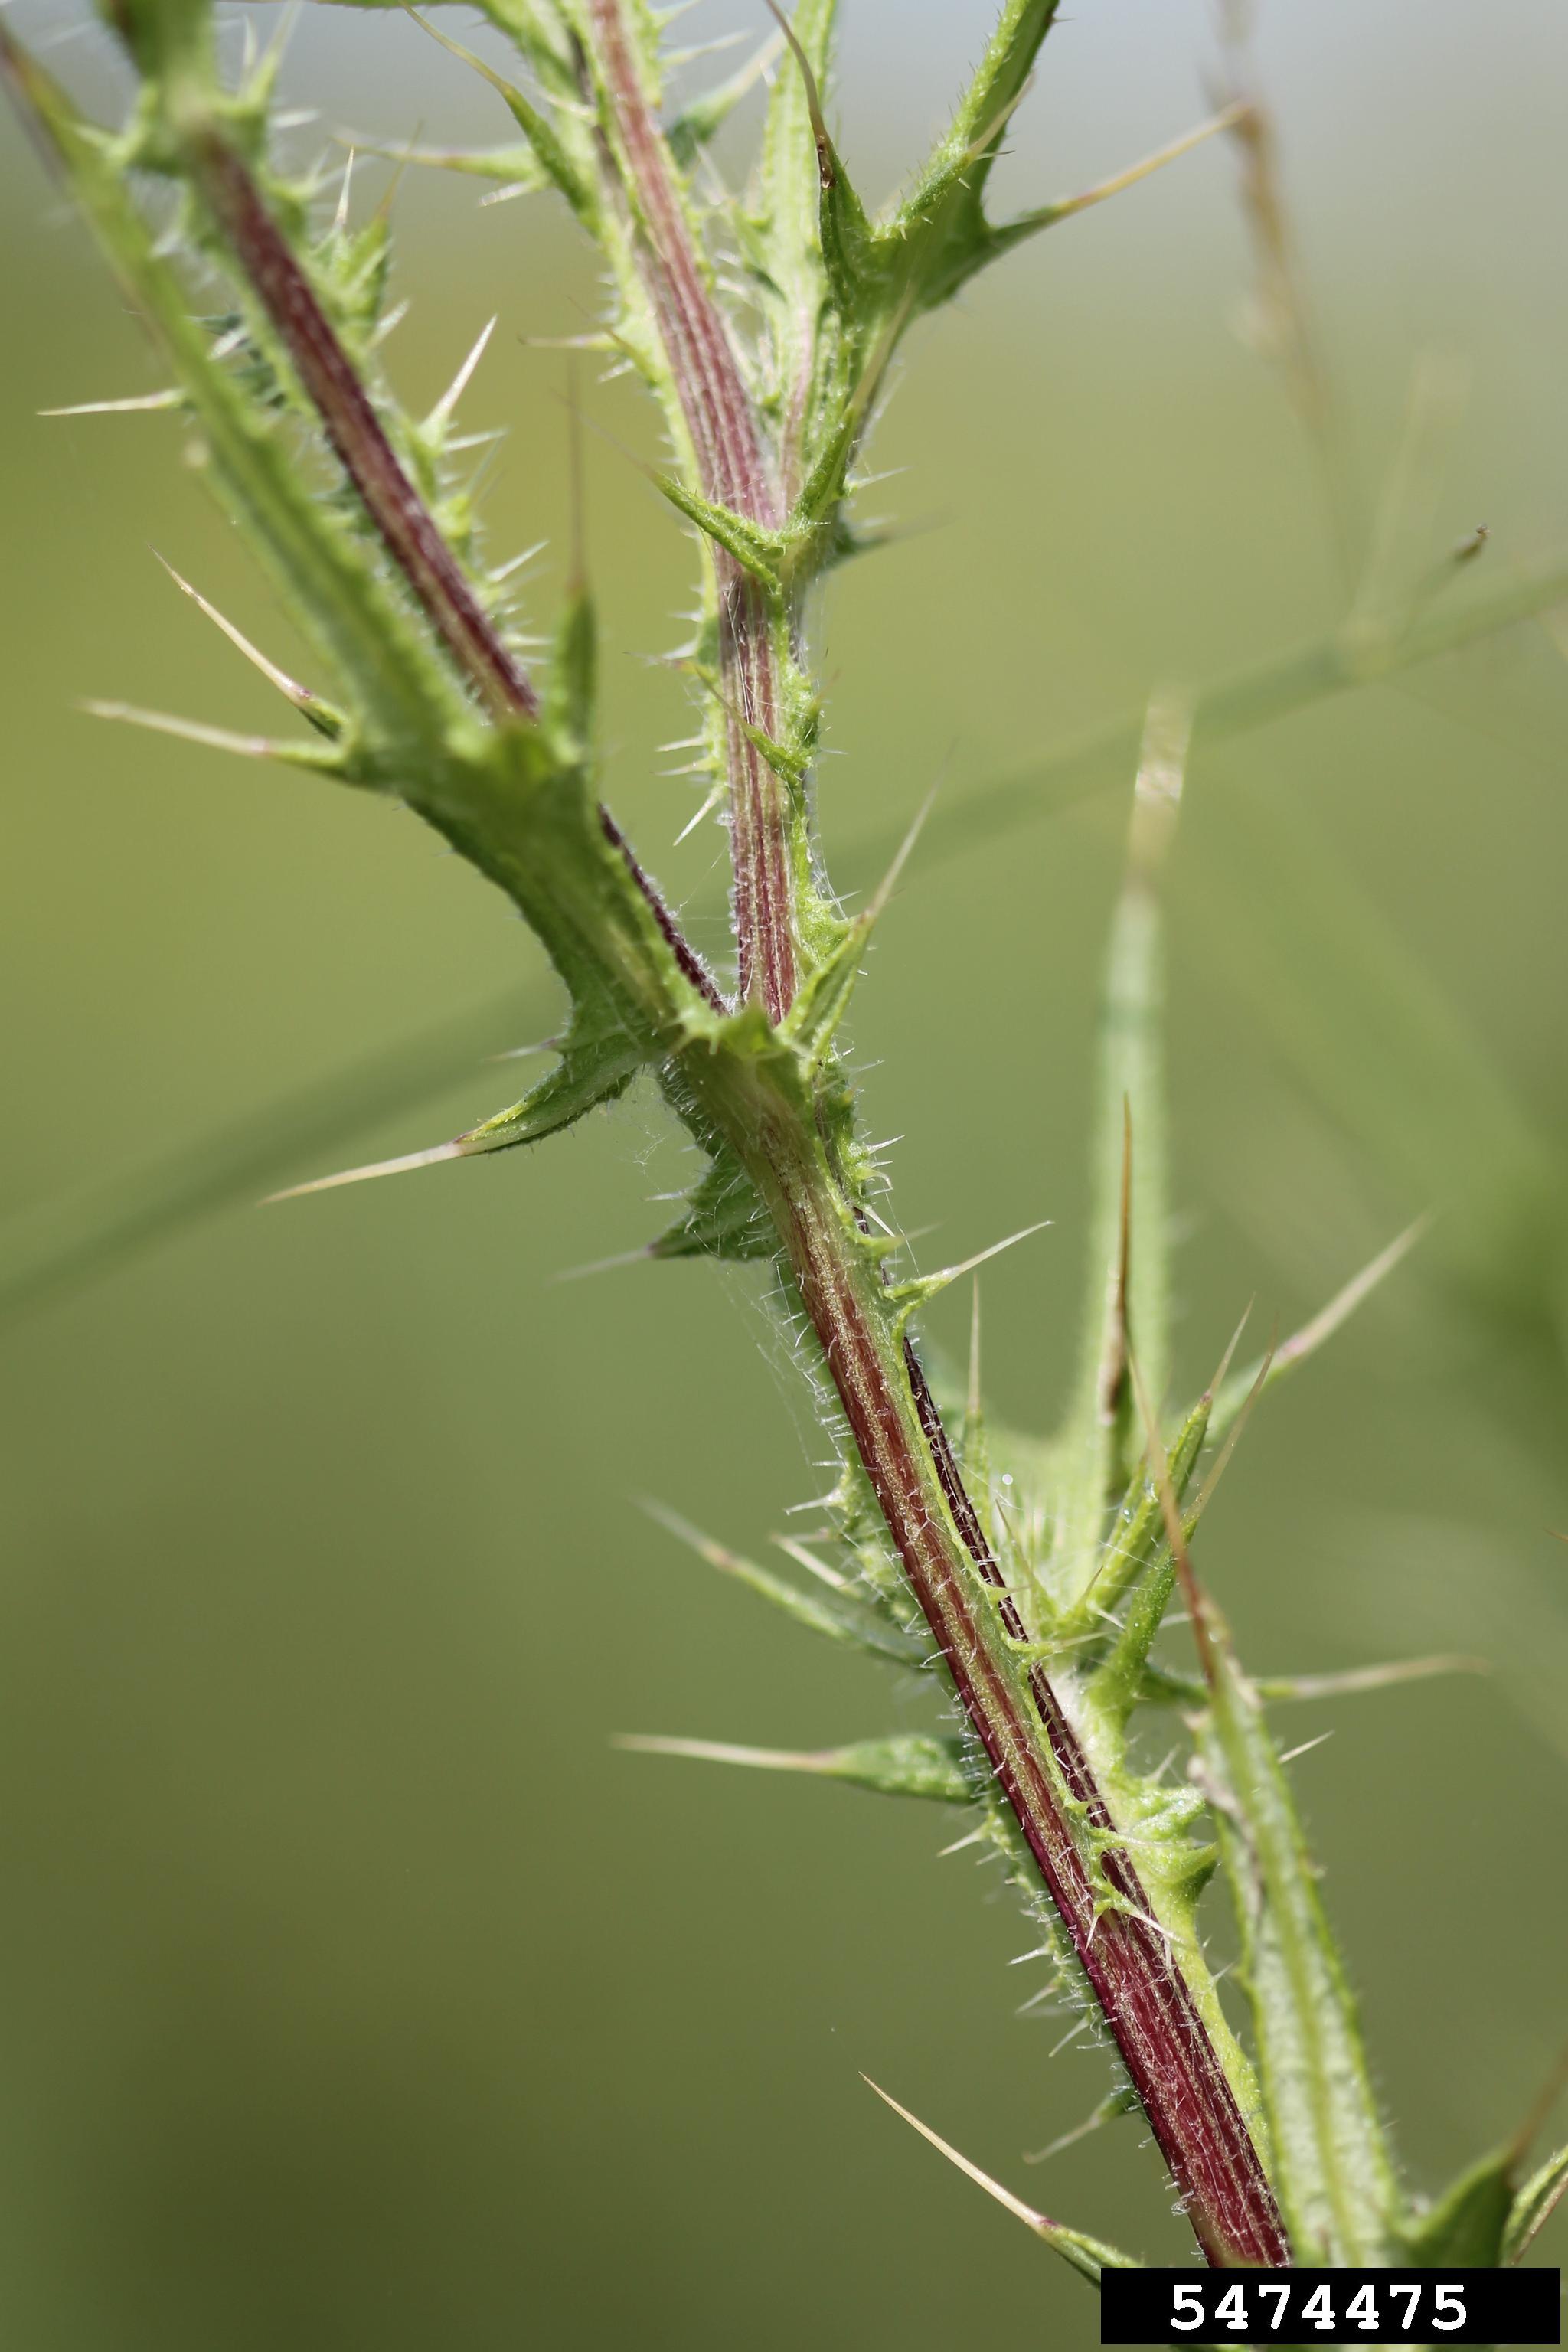 The leaf margins of a flowering bull thistle plant are tipped with spines, and the stems have spiny wings.